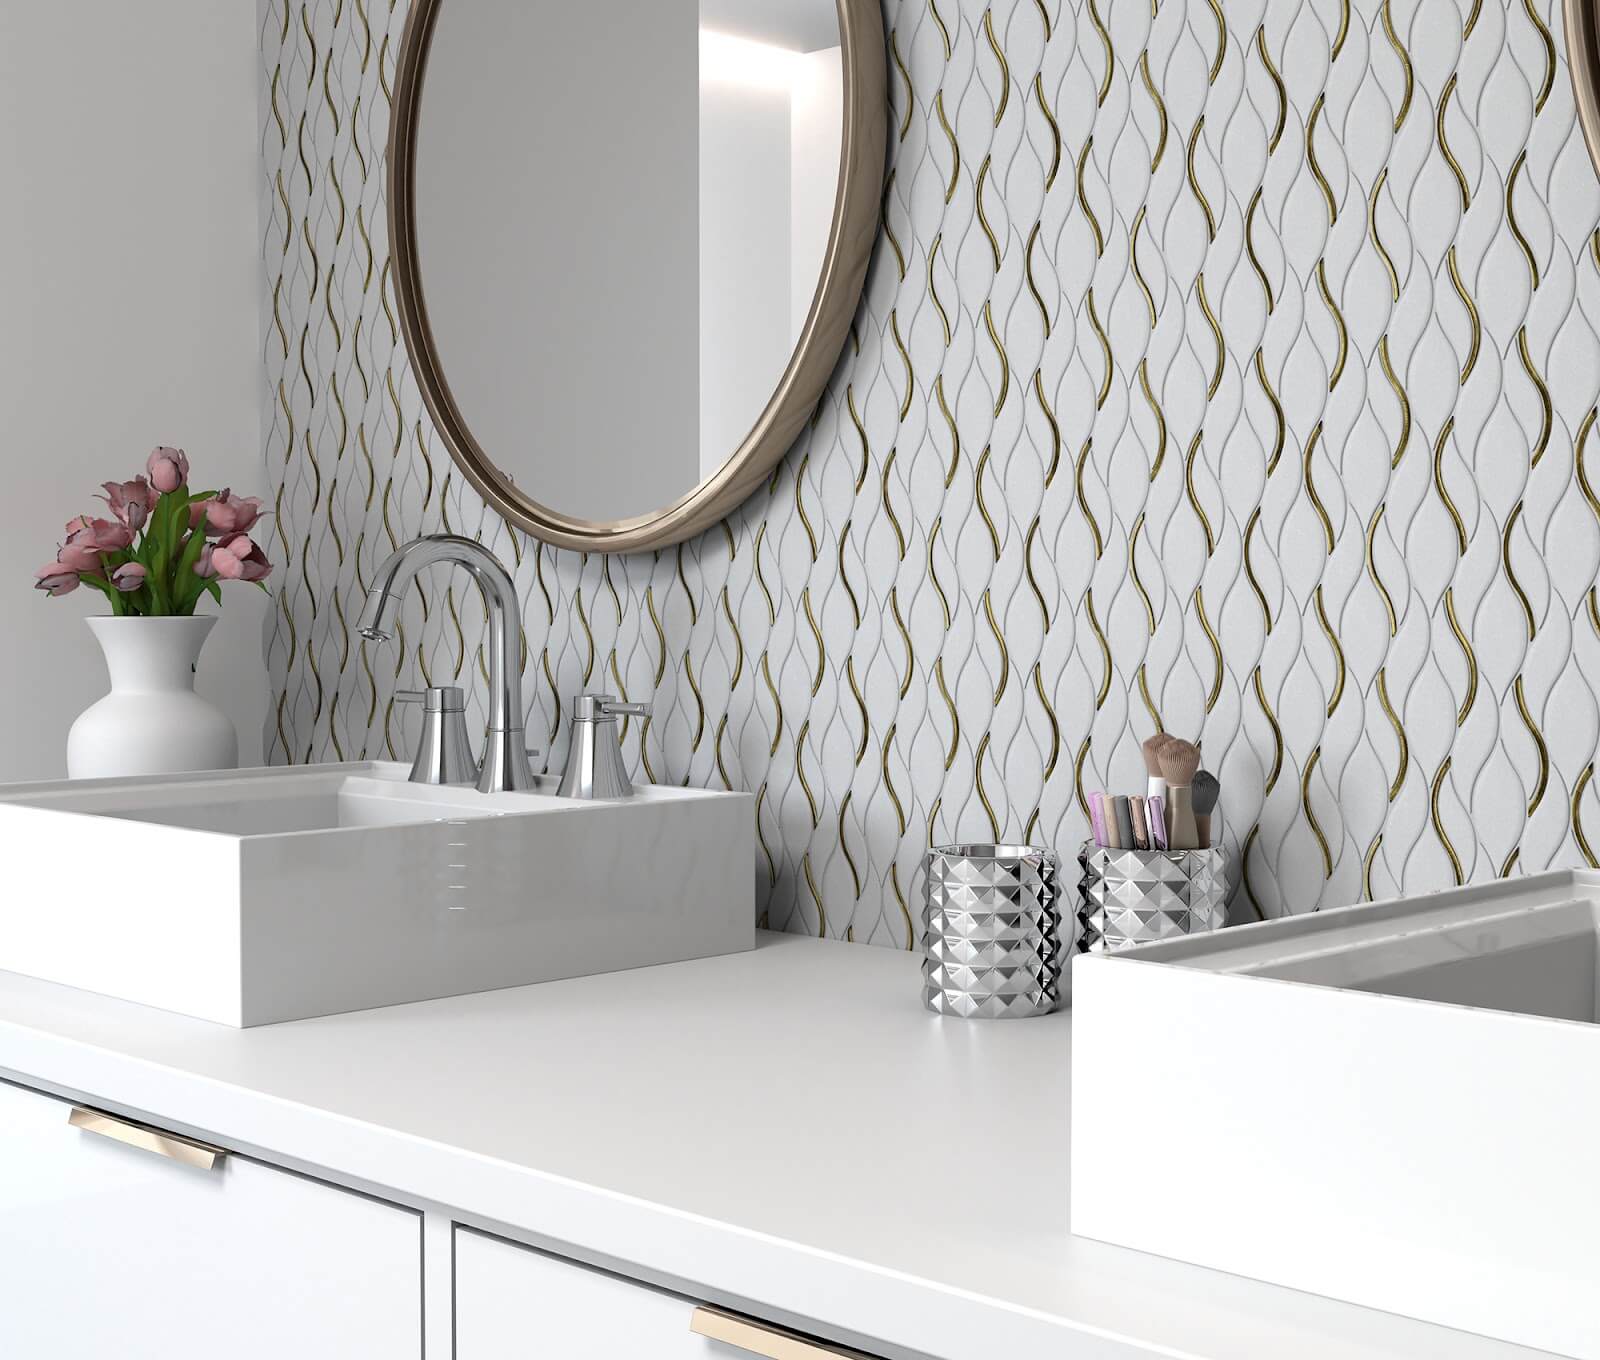 White vertical wavy tiles accented with gold for bathroom sink wall